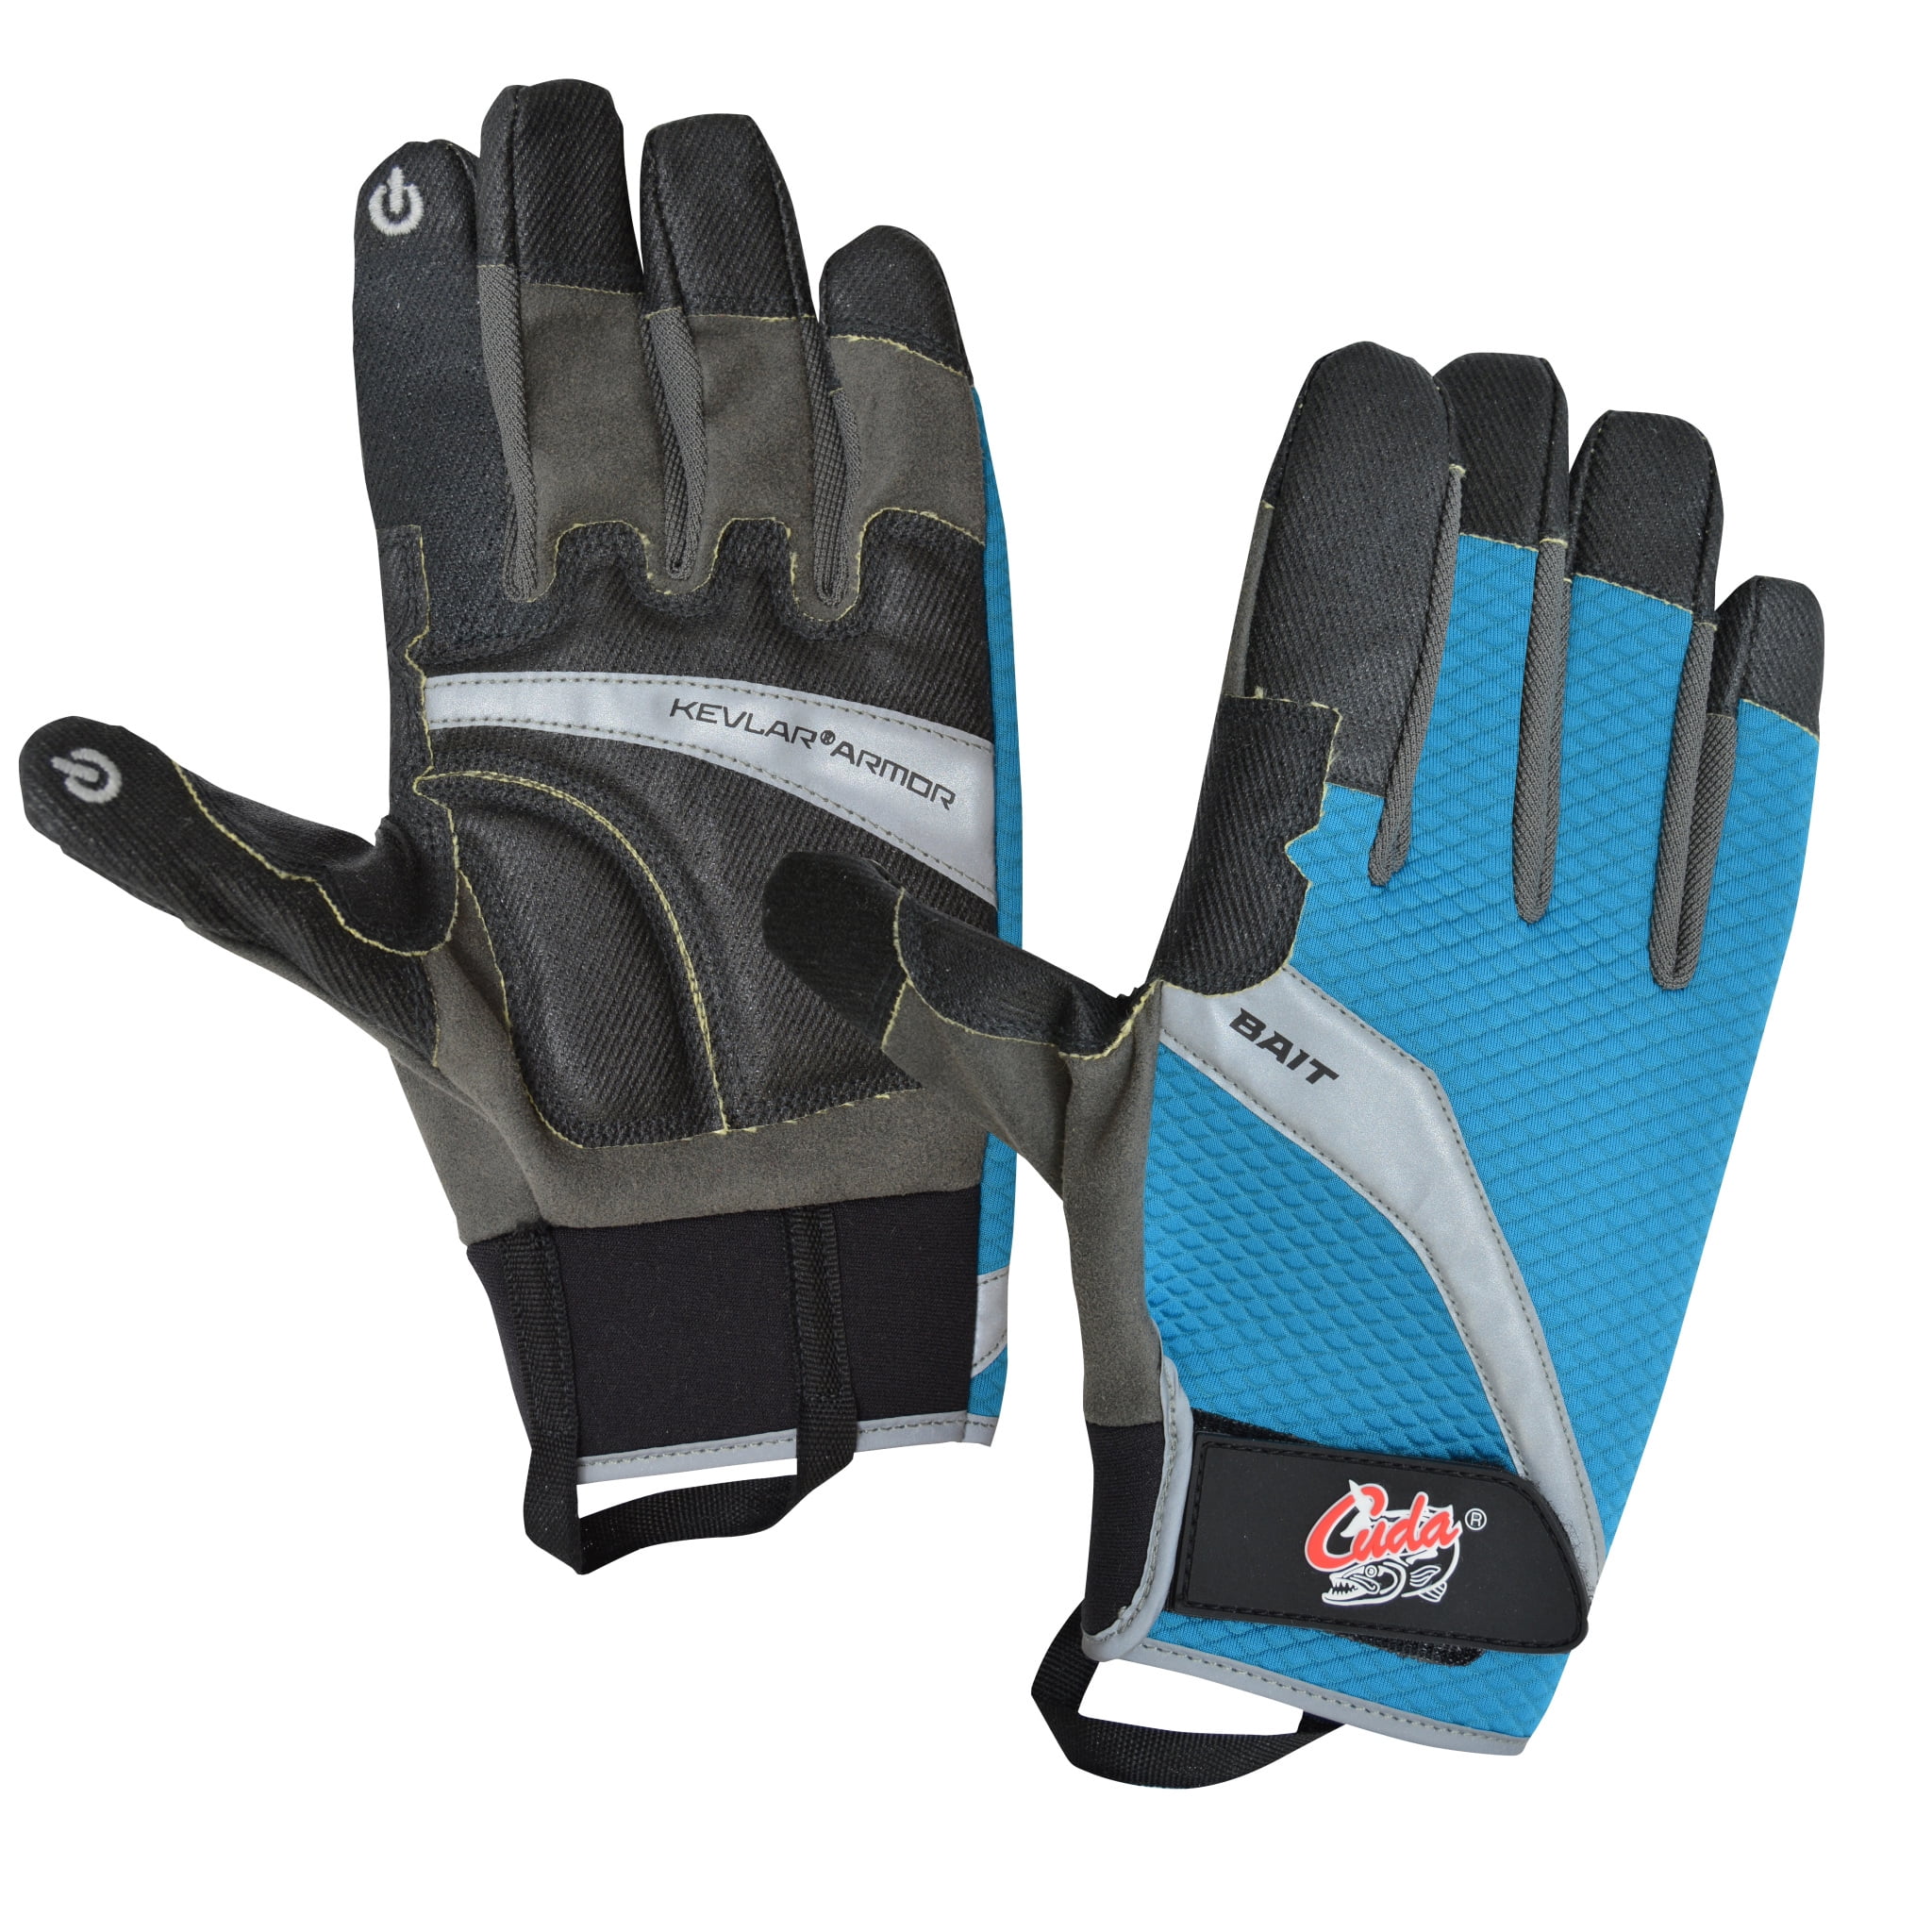 Rapala Fishing Gloves & Accessories